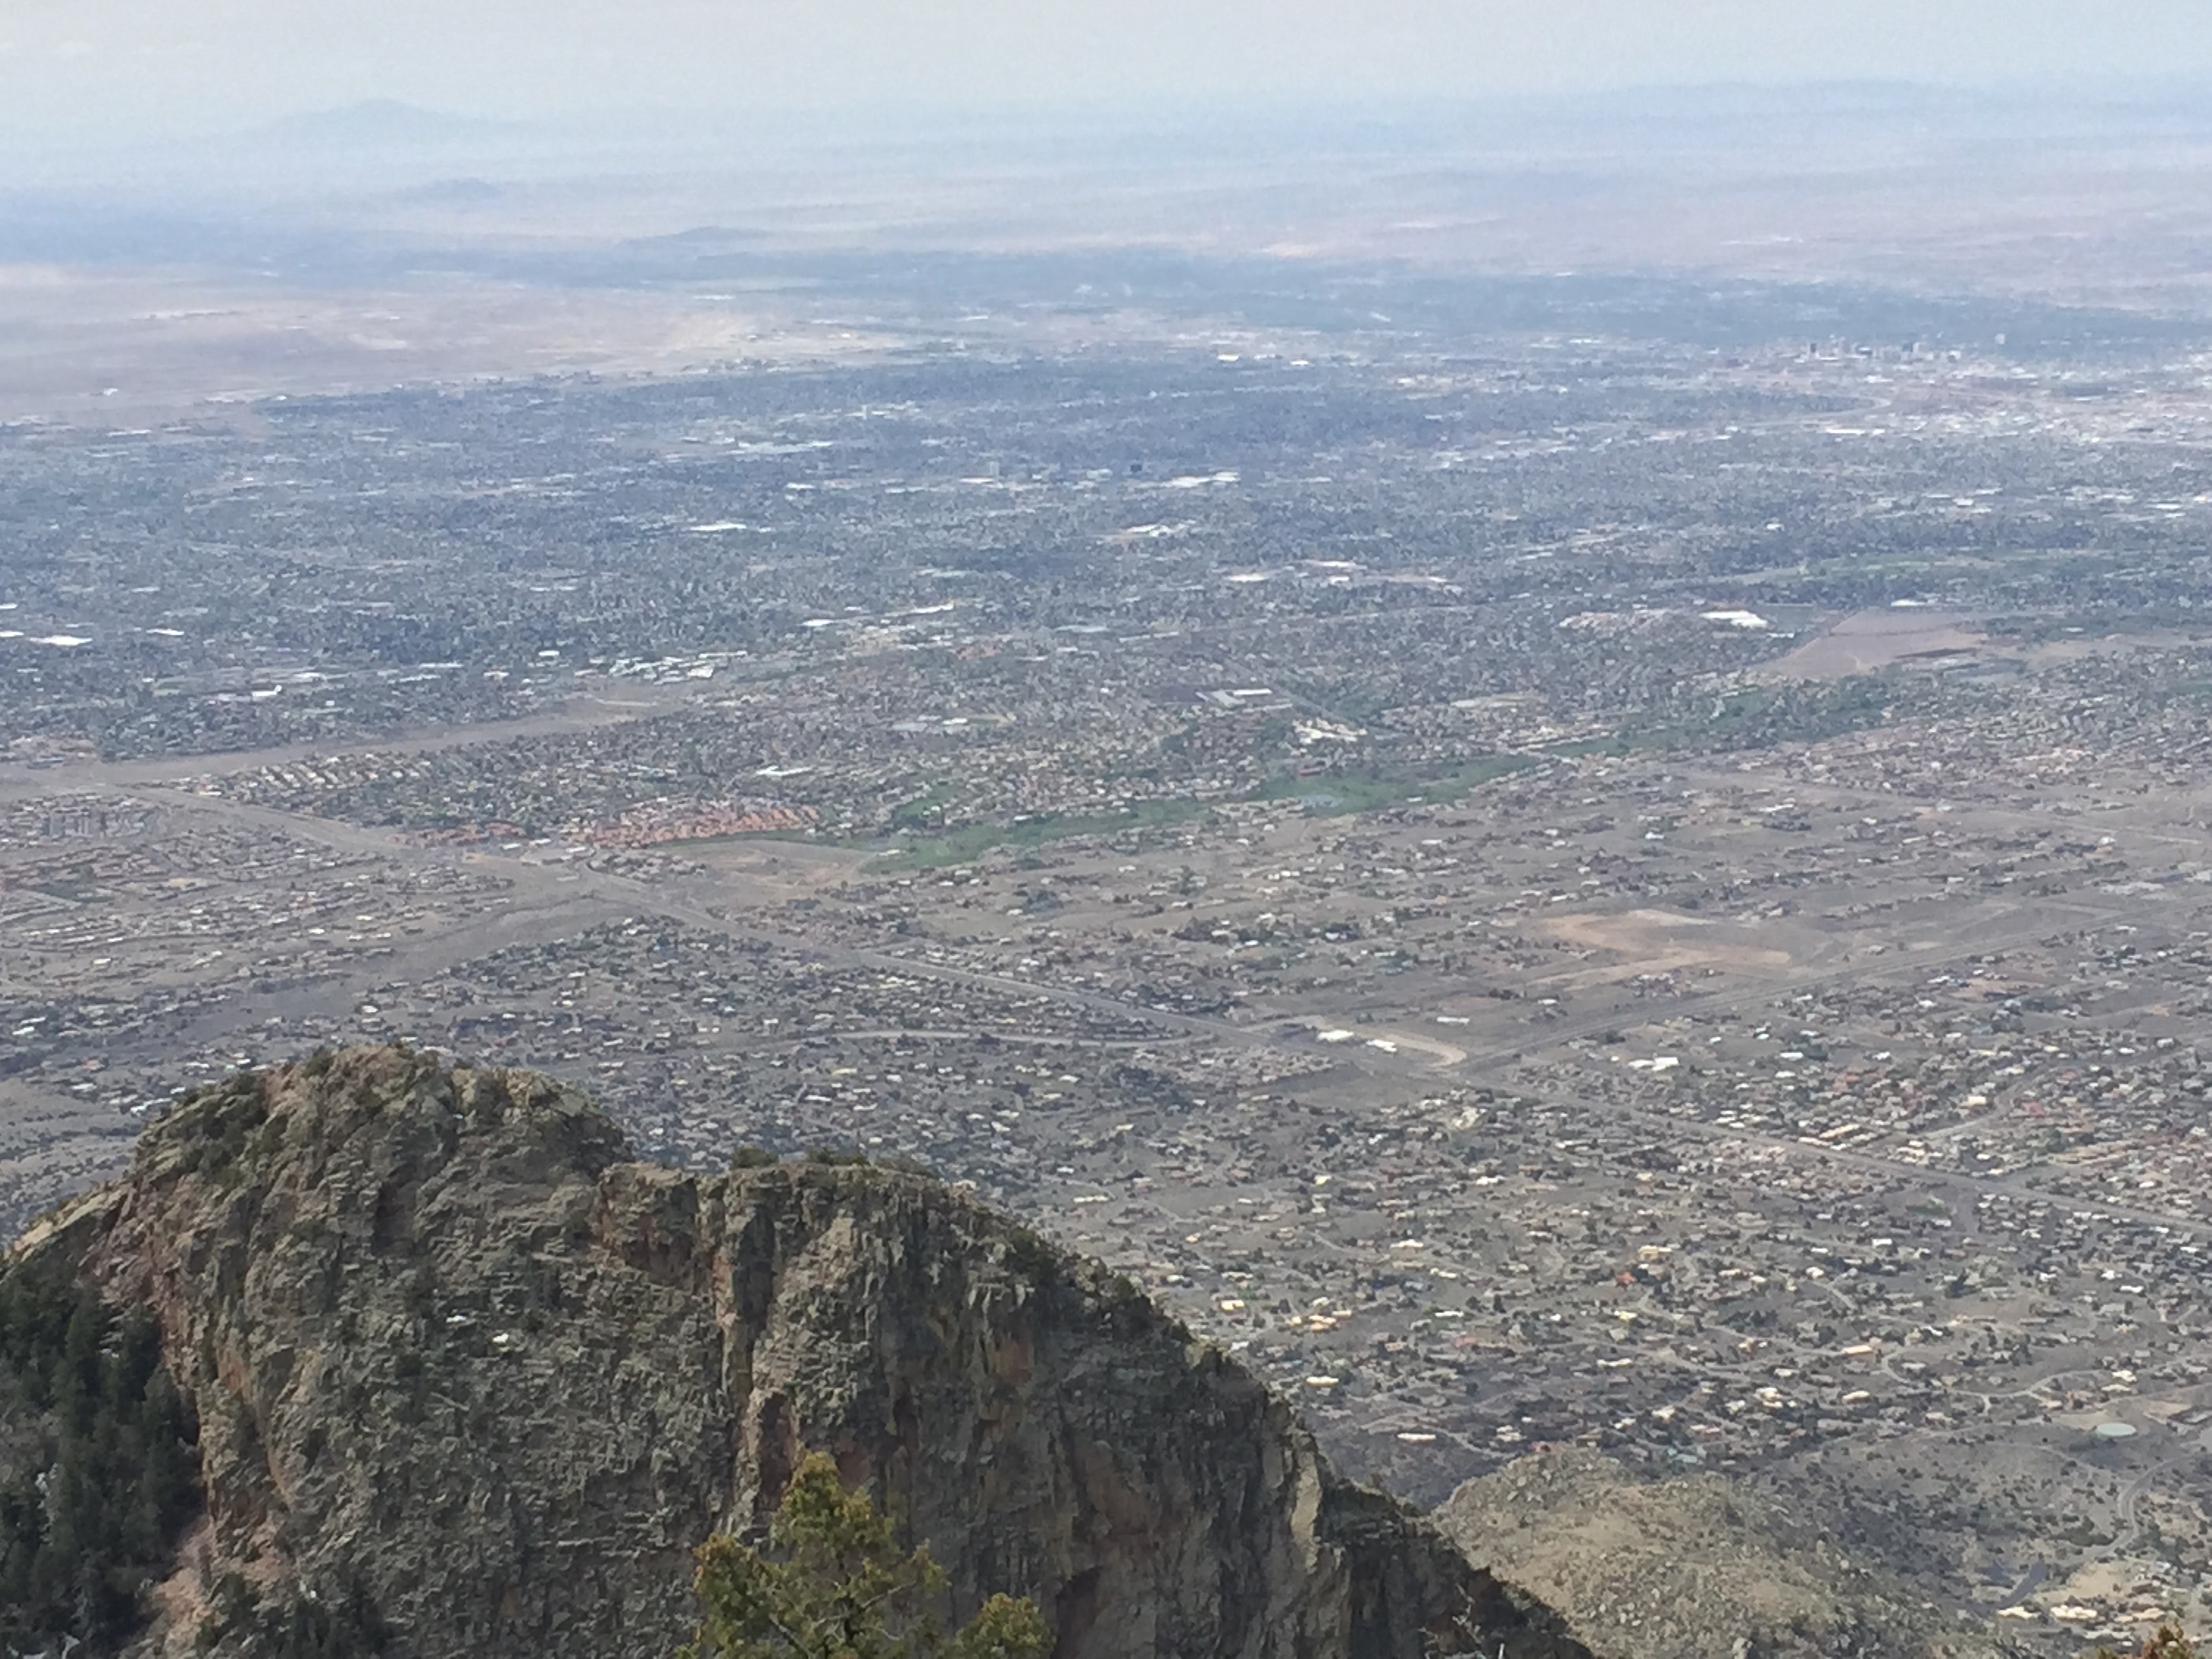 Looking back down in Albuquerque